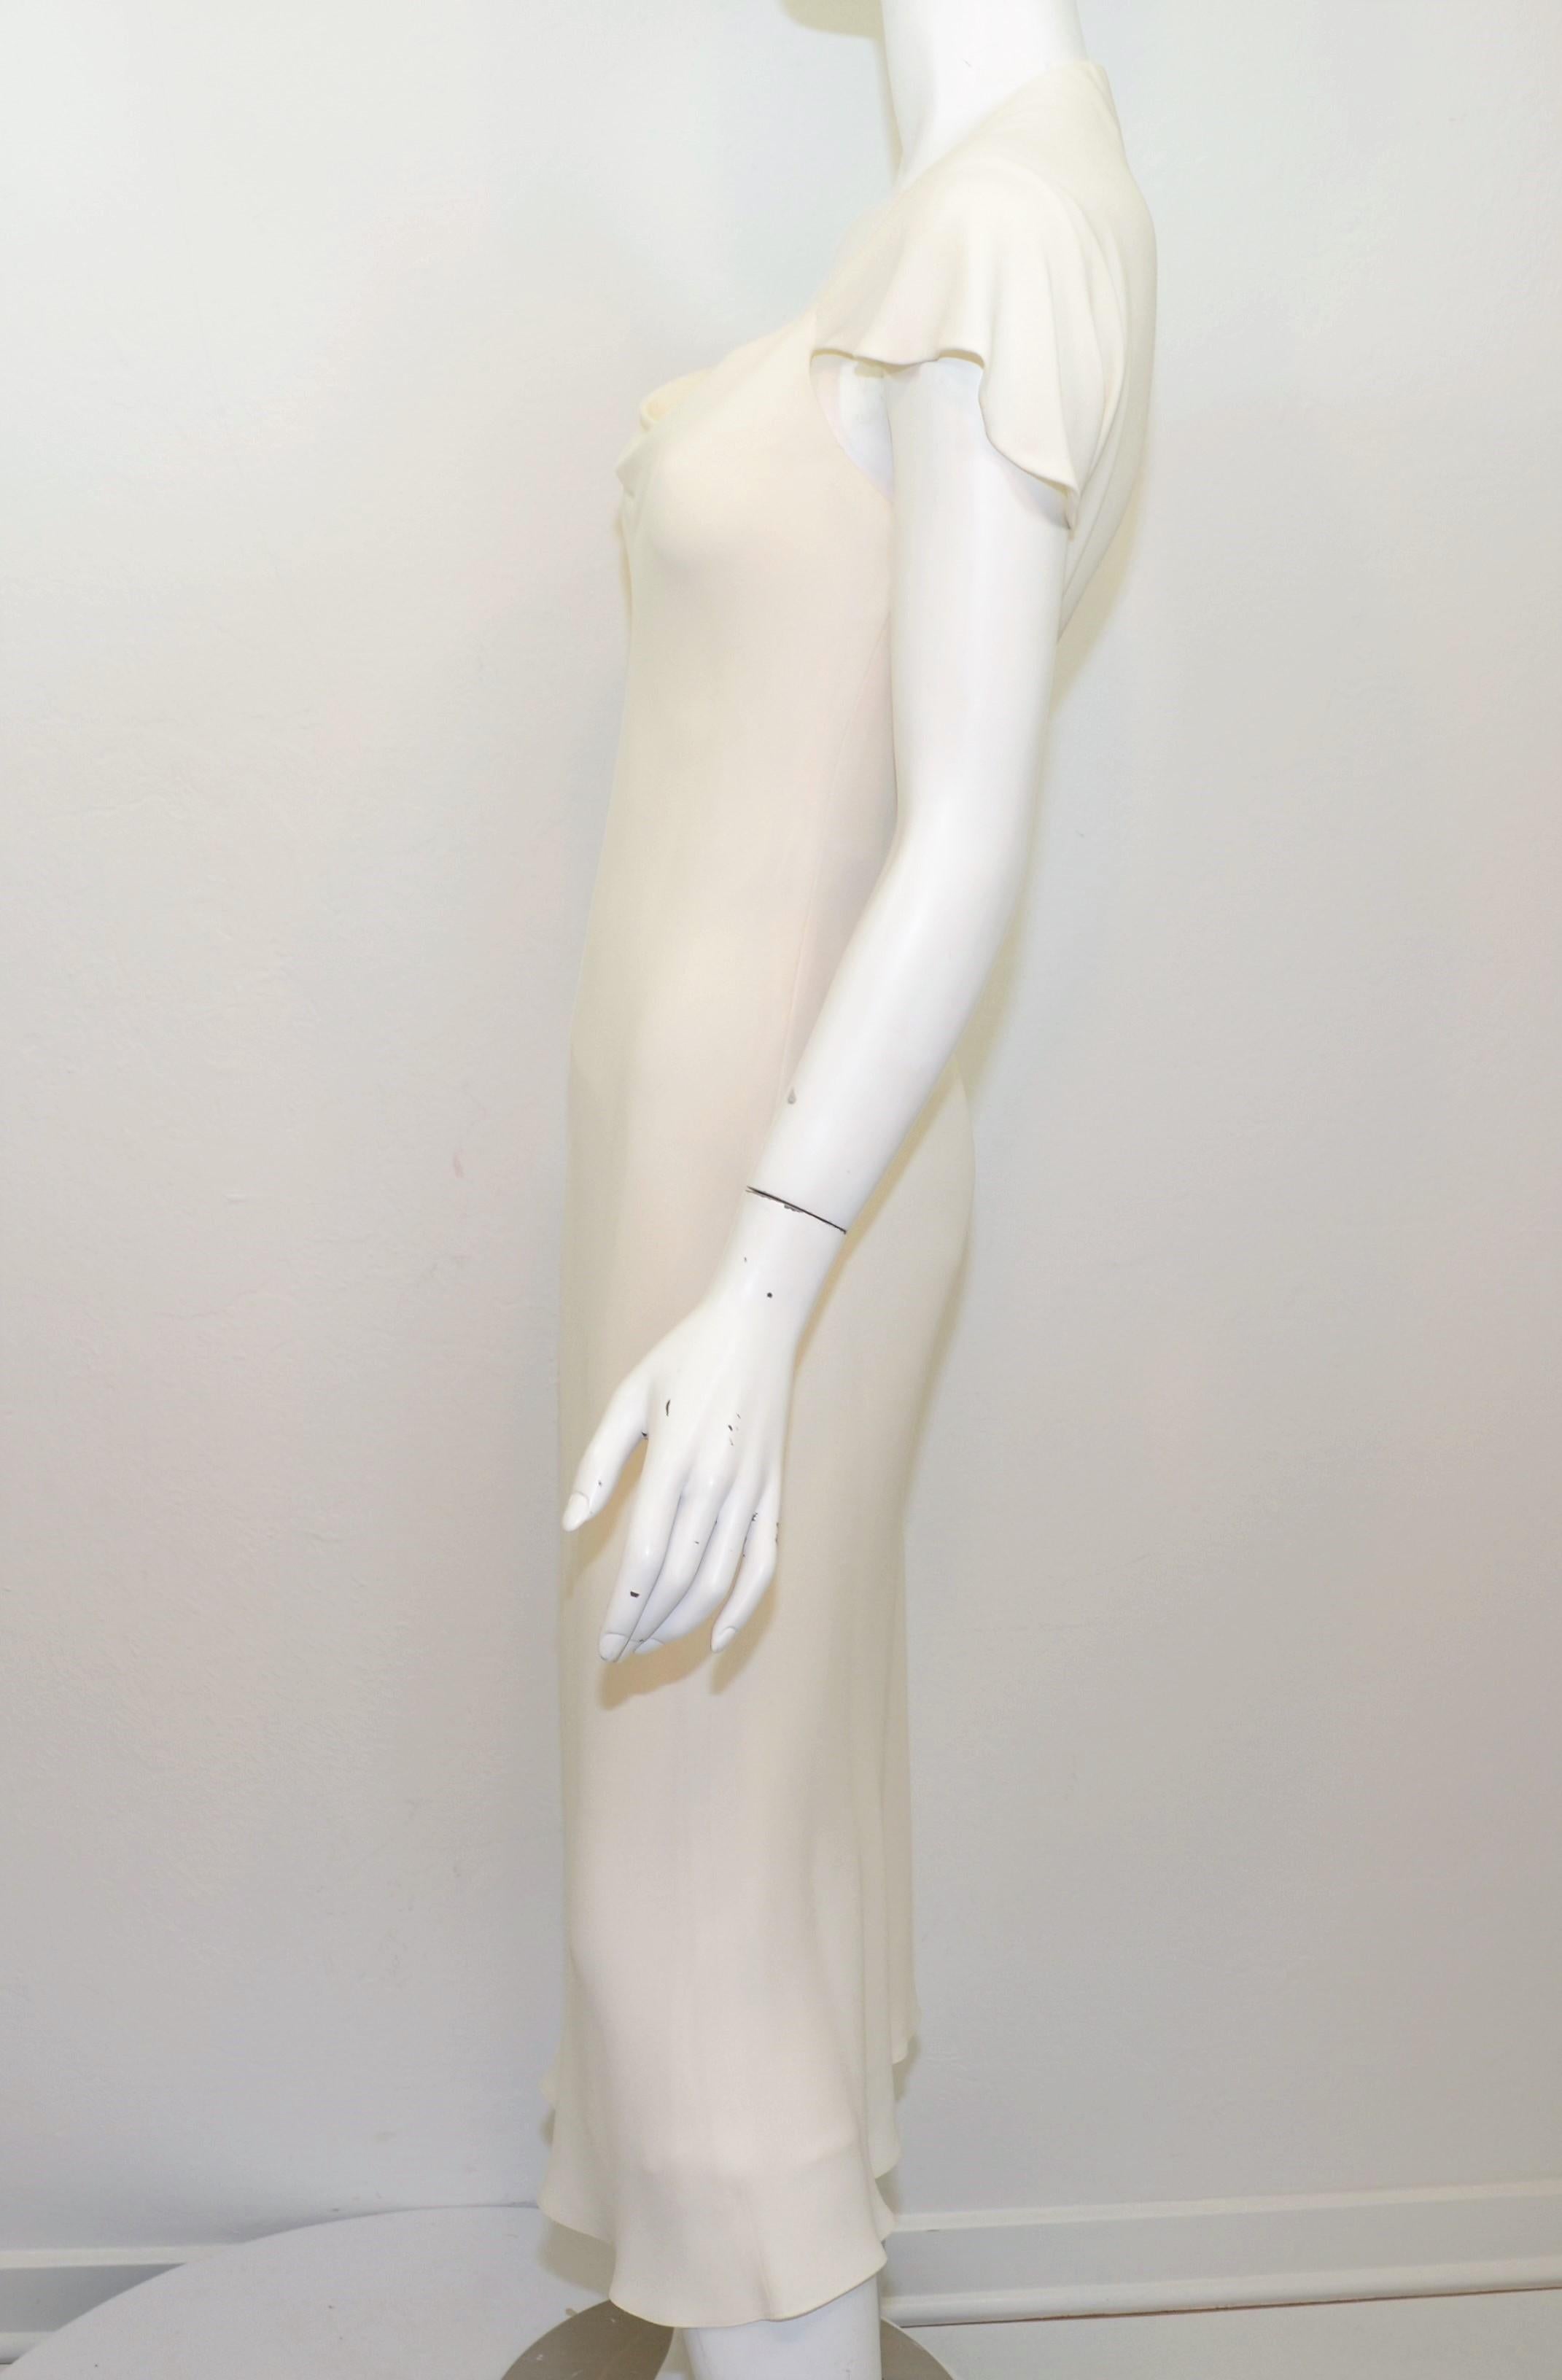 Ralph Lauren Silk Bias Cut Gown / Minimalist Dress. Featured in an ivory cream color, composed with 100% silk, size 4, bias cut fabric which helps accentuate body lines and curves and allows soft draping. Dress has a draped neckline and cap sleeves,